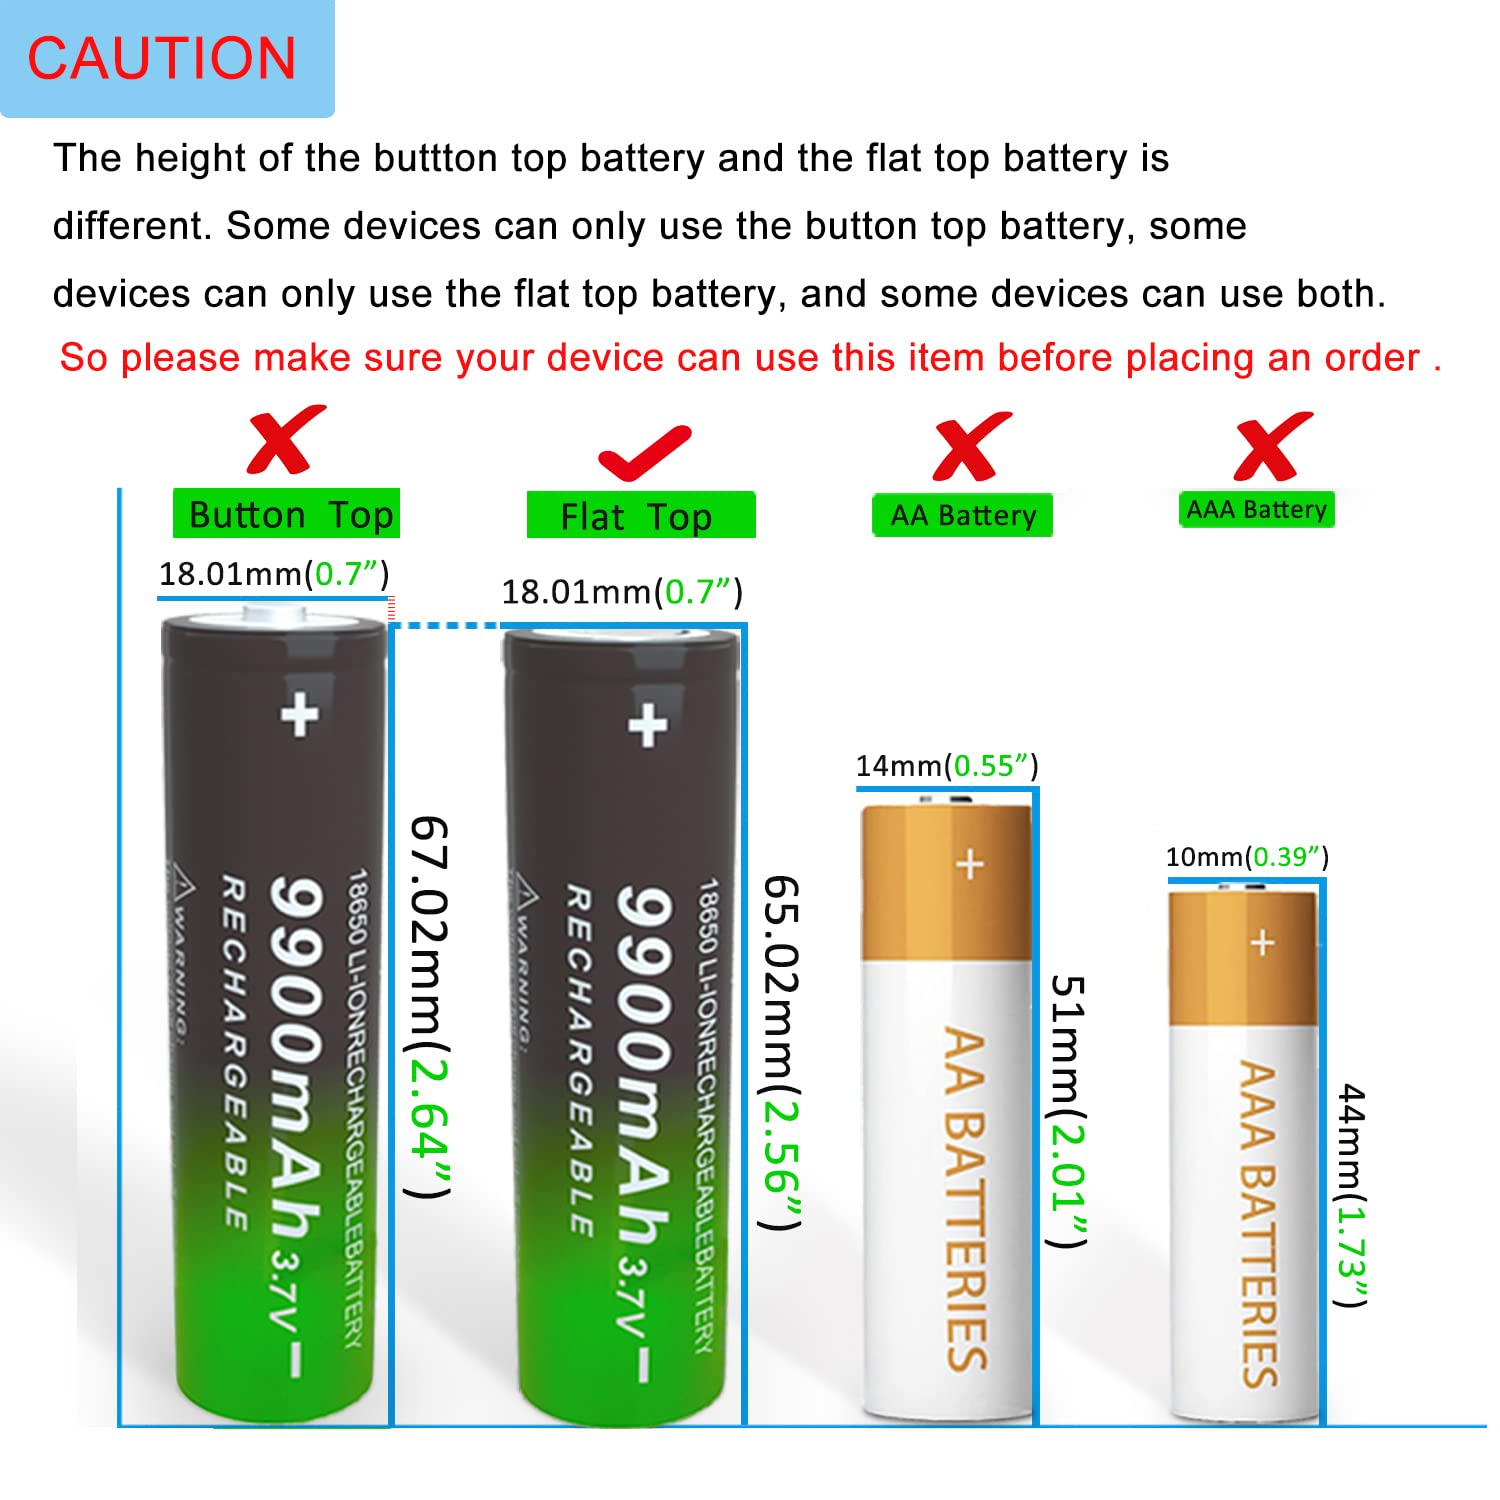 CWUU 18650 Rechargeable Battery 3.7Volts with Flat Top 9900mAh for Flashlight US Shipping(Flat Top, 8 Pack Green)